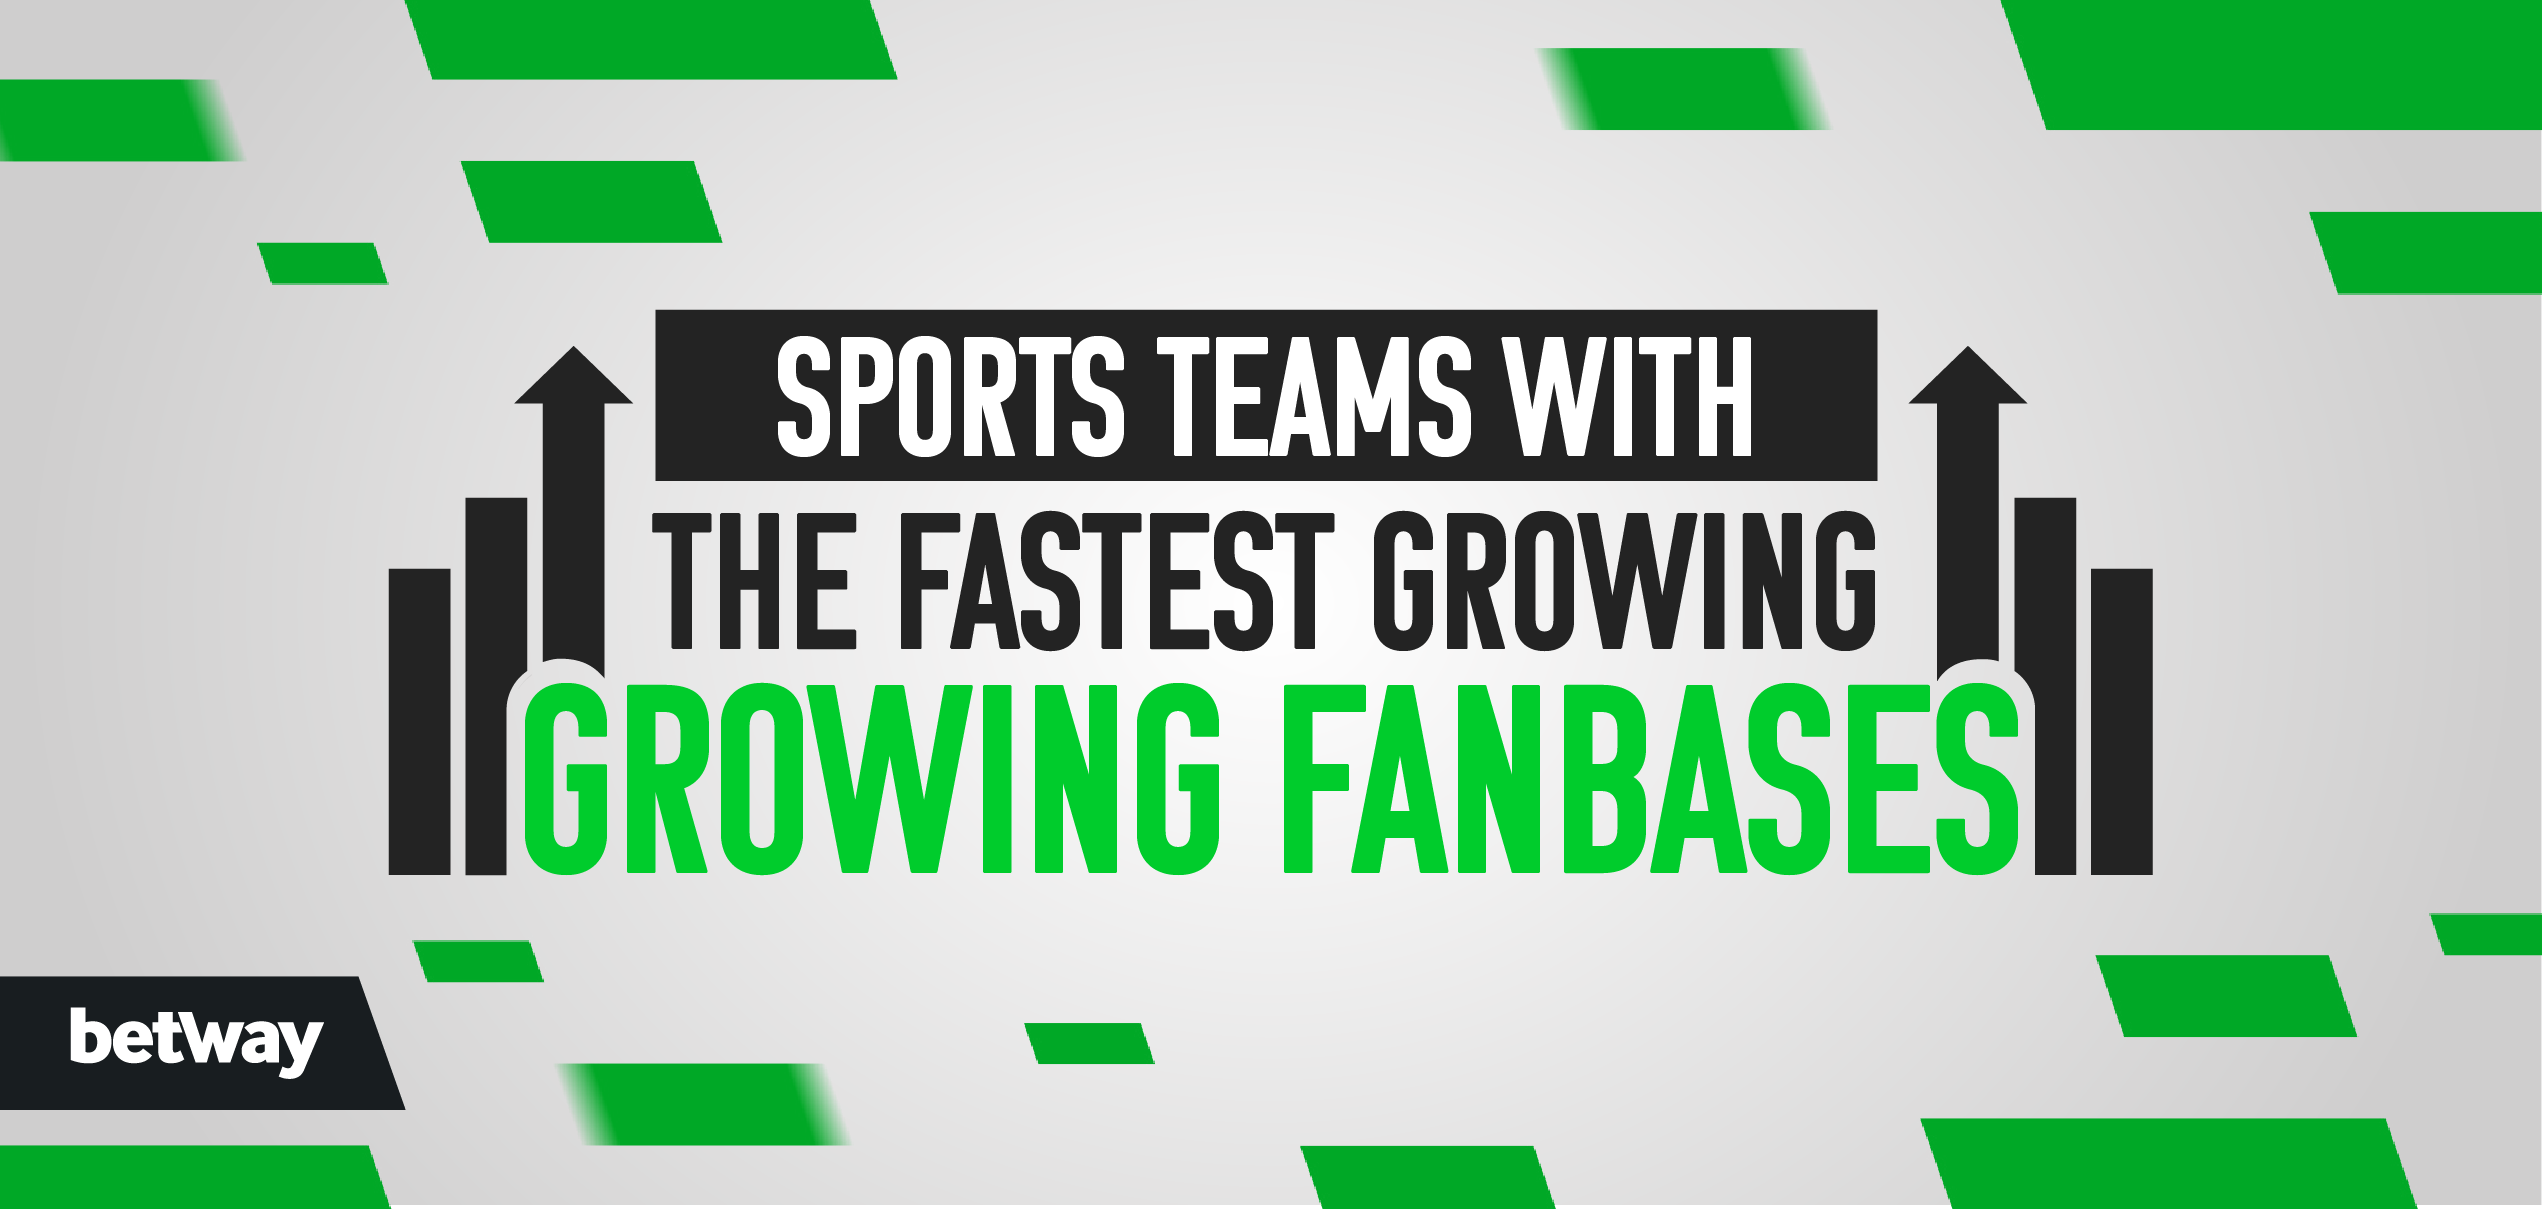 The Fastest Growing Major League Fanbases